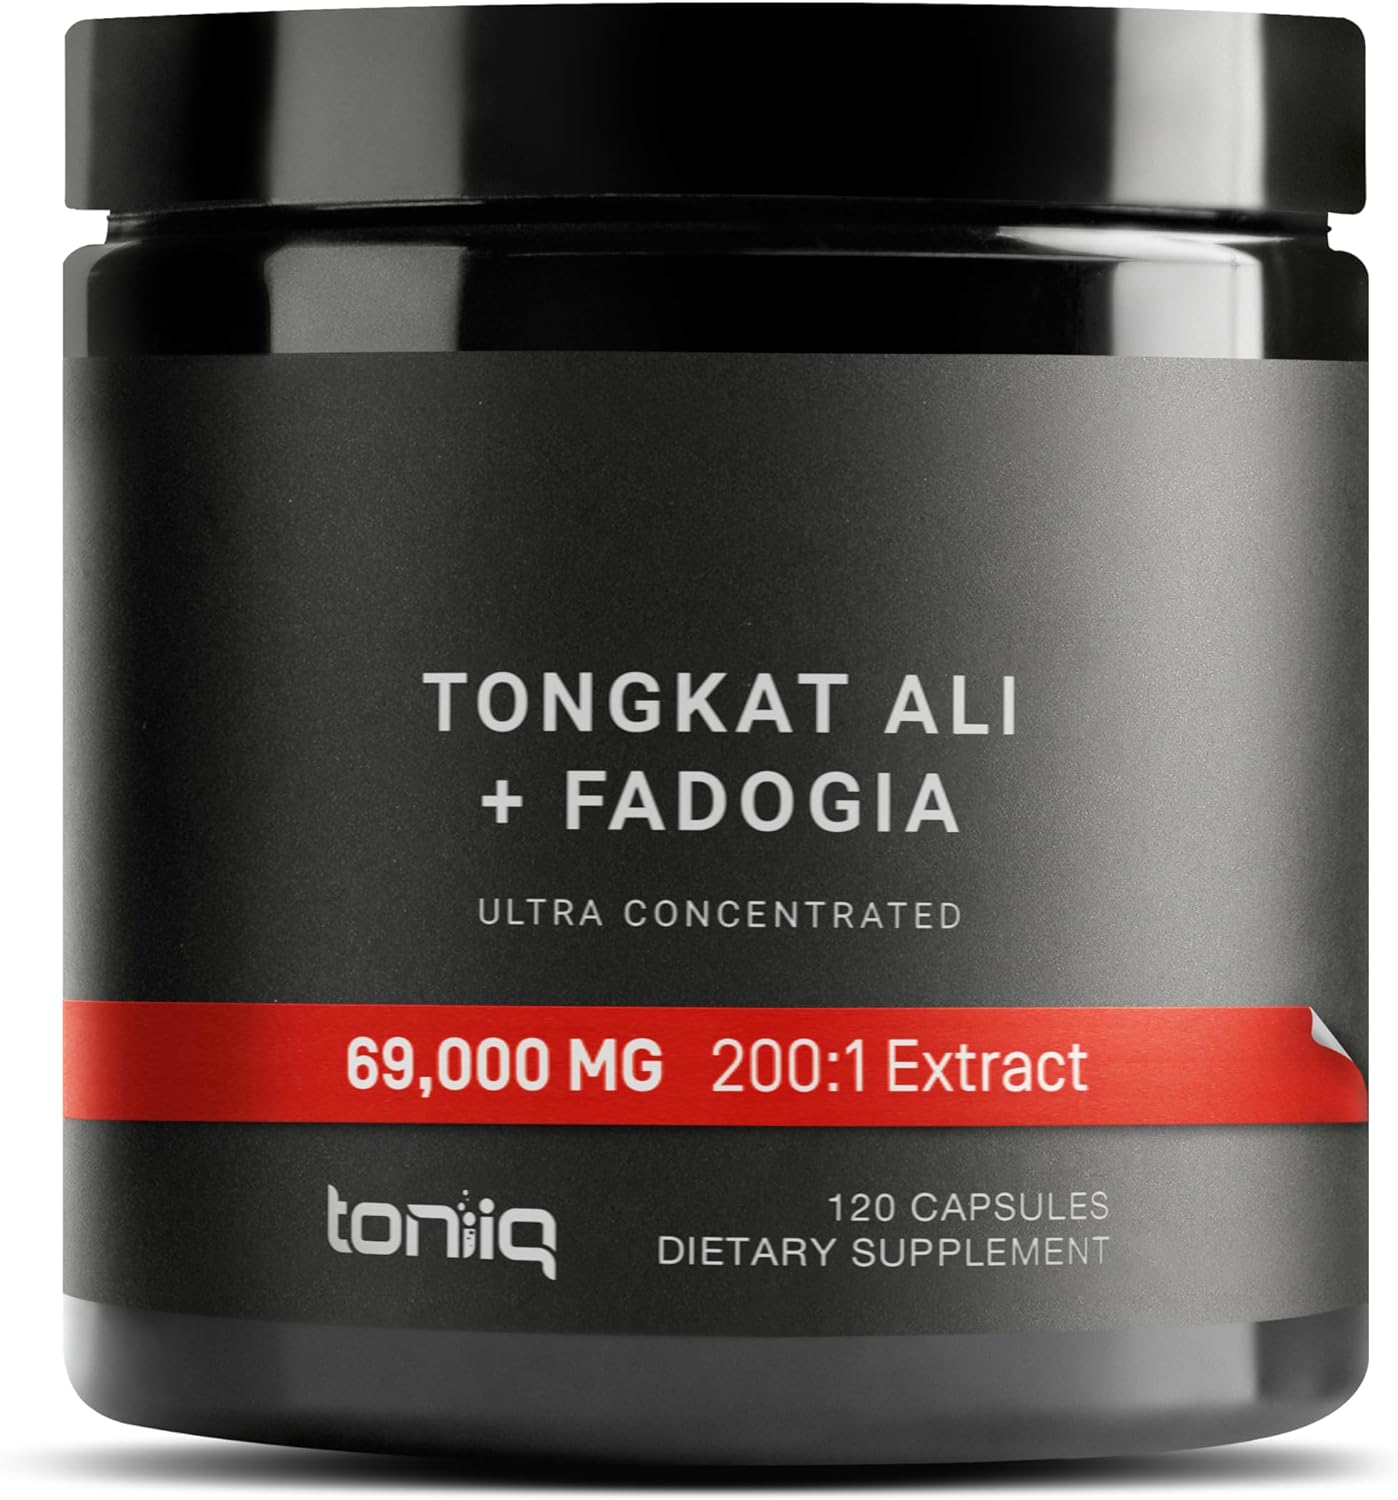 Toniiq Tongkat Ali and Fadogia Agrestis Ultra Concentrated 69,000mg Blend